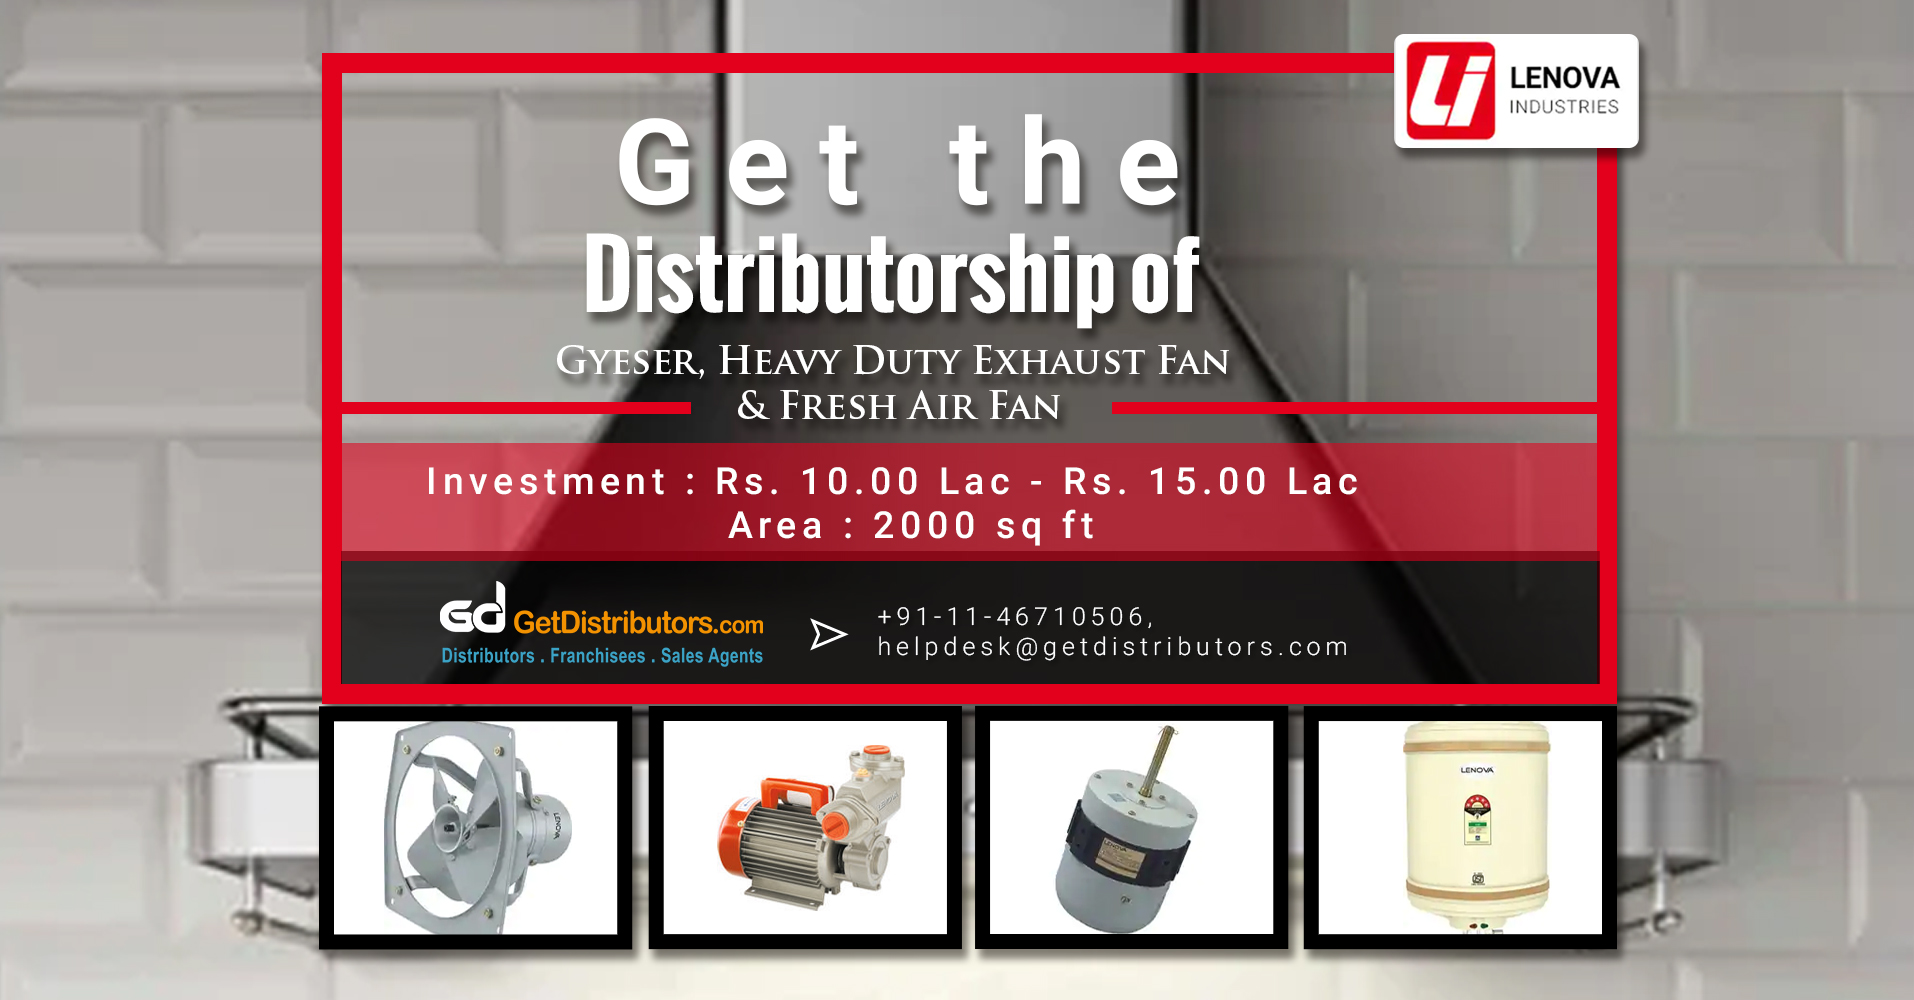 Good Quality And Trusted Electrical Appliances Distributorship By Lenova Industries